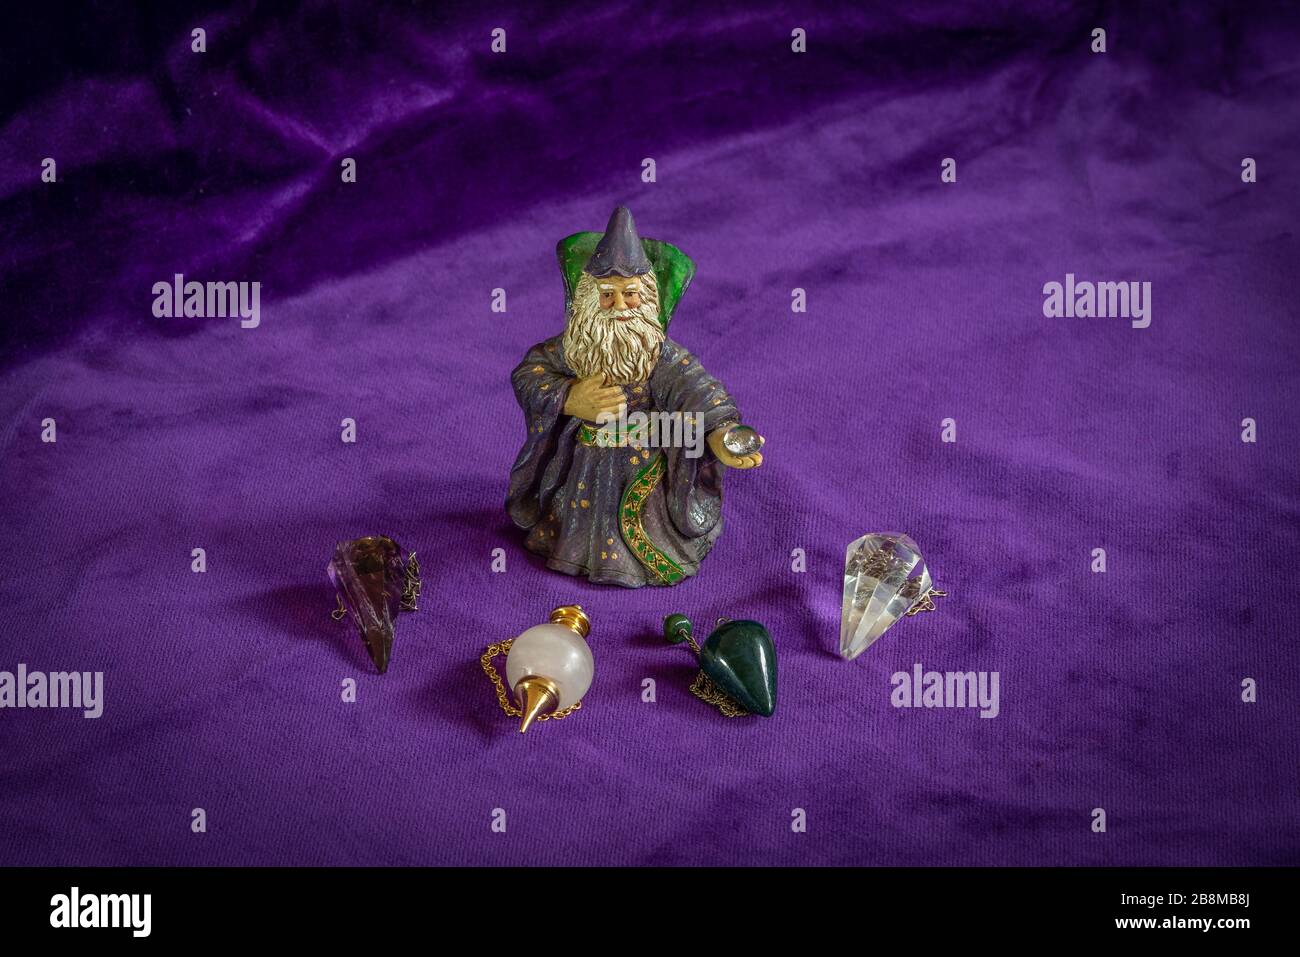 Fortune telling: small wizzard figure and four crystal dowsing pendulums Stock Photo